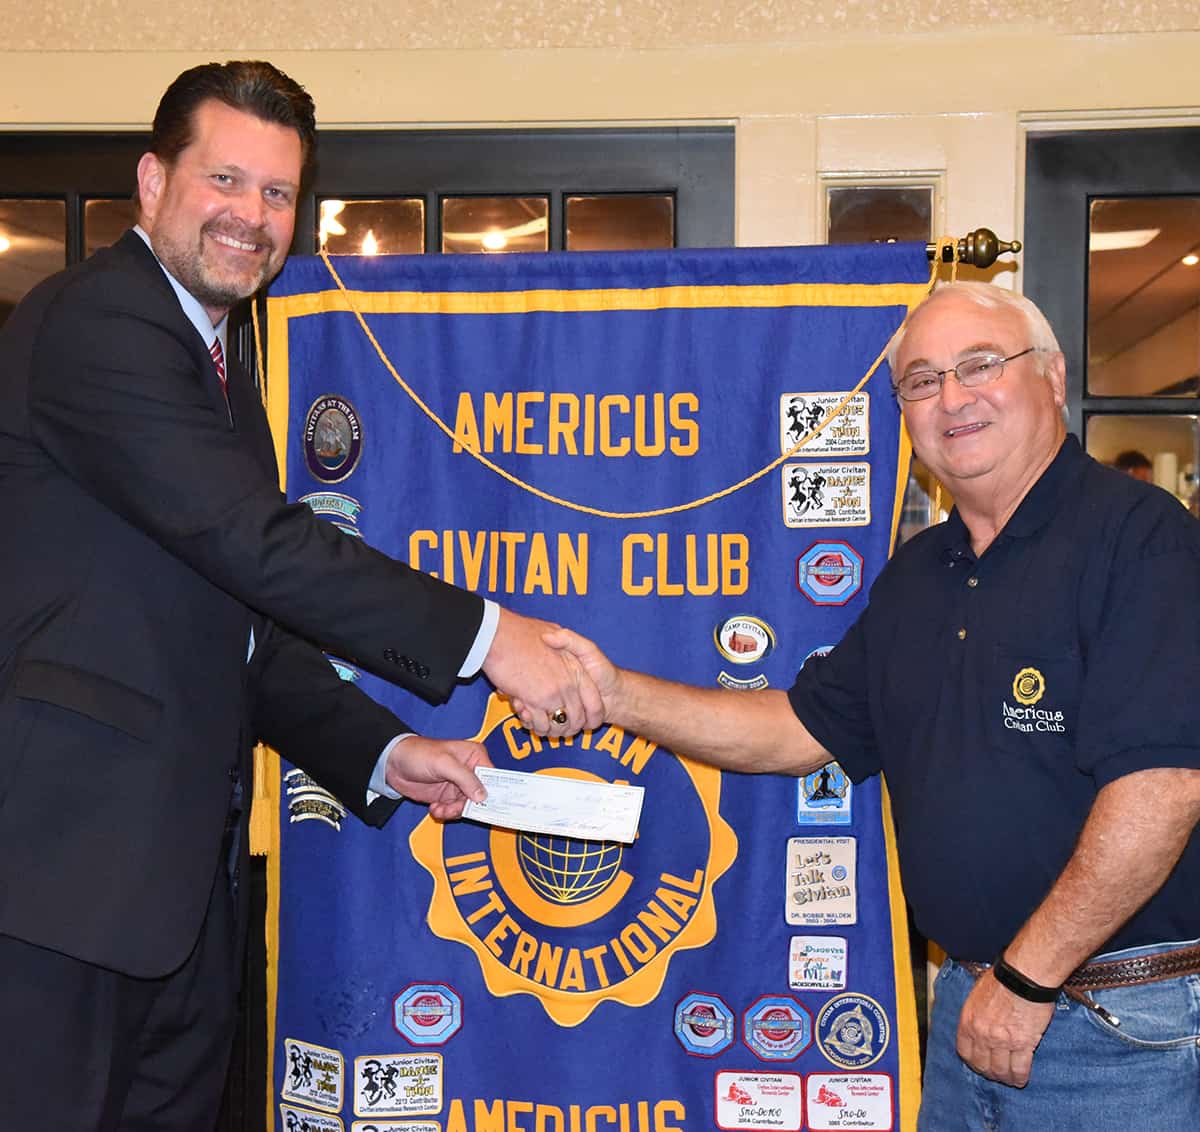 Americus Civitan Club President Dale Davis (right) is shown above presenting a check to South Georgia Technical College President Dr. John Watford (left) for the Americus Civitan Club’s endowed scholarship for nursing students